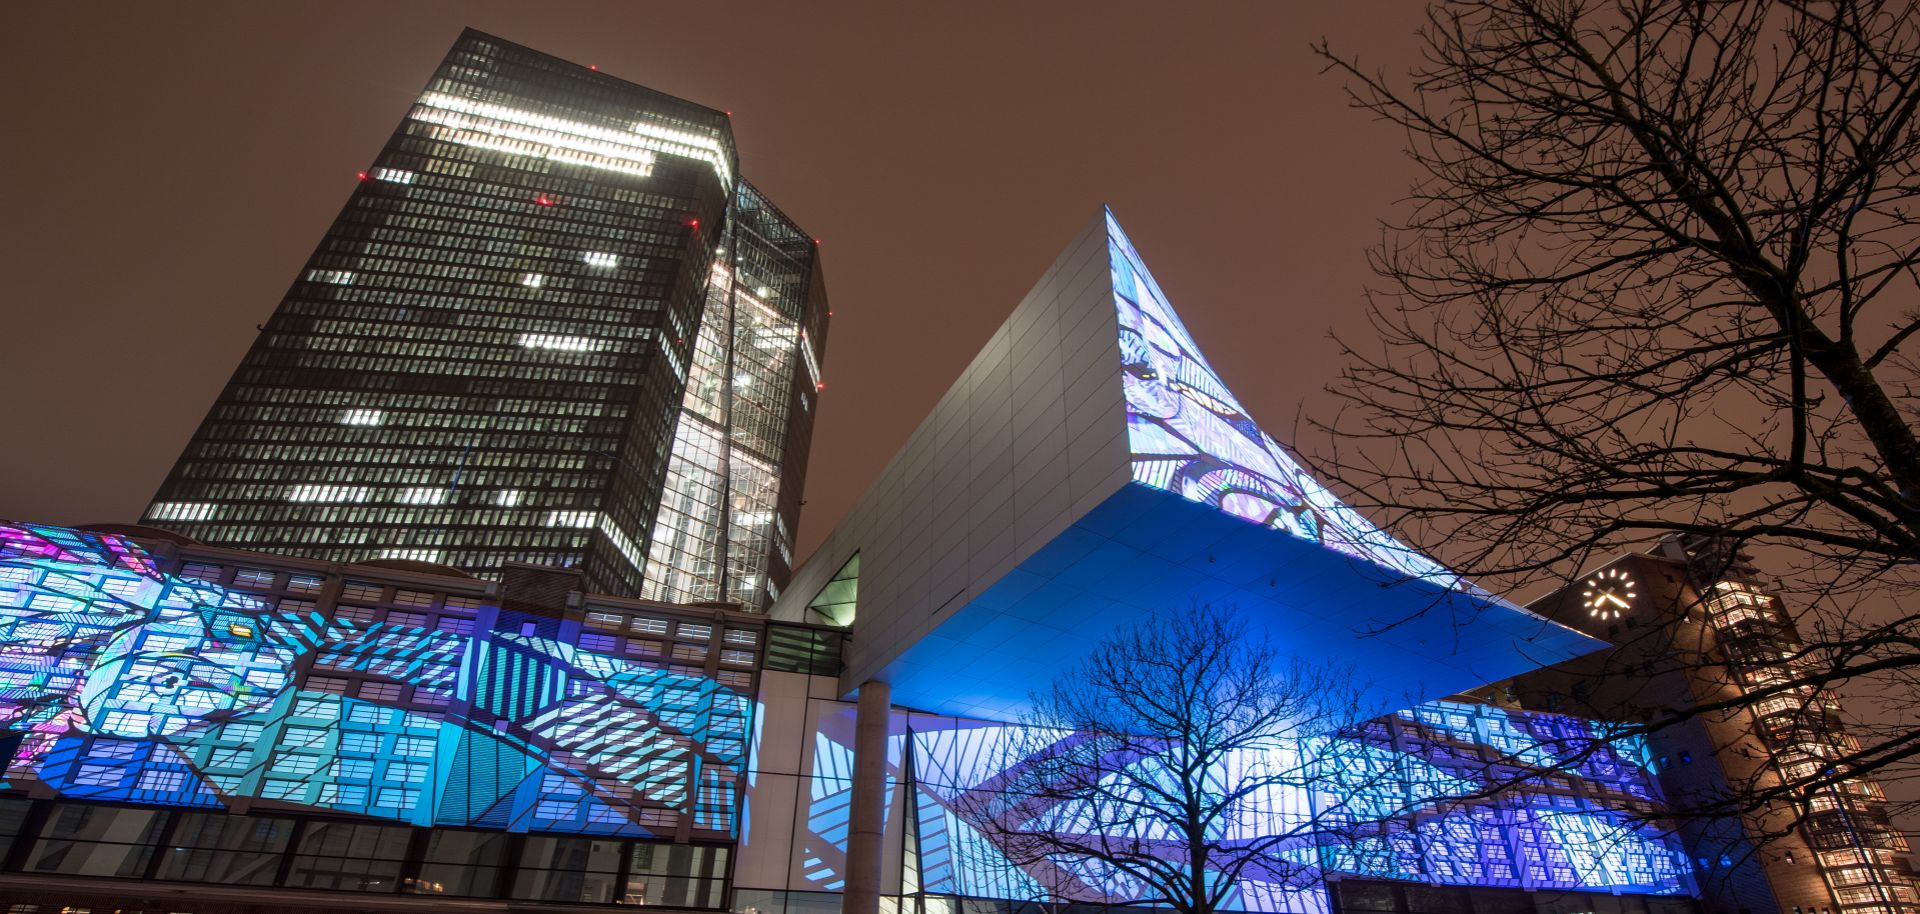 The historic facade of Frankfurt's Grossmarkthalle, now part of the building of the European Central Bank (ECB), is illuminated on March 16, 2018.